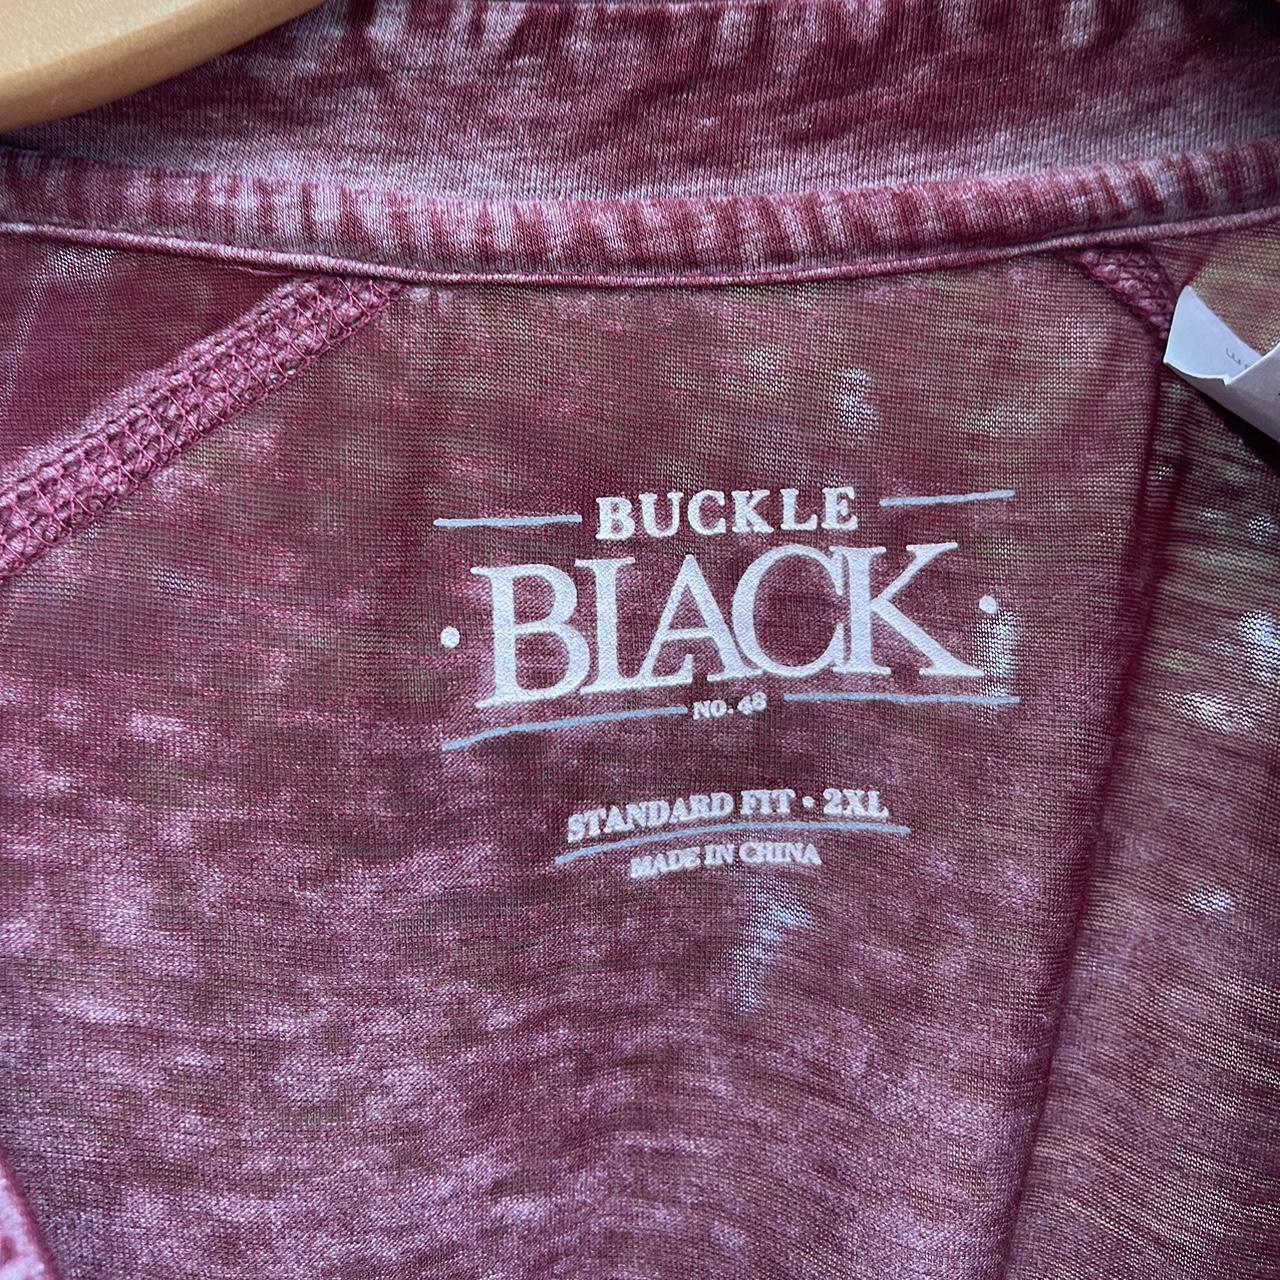 Buckle Black Men's Burgundy and Red T-shirt (3)